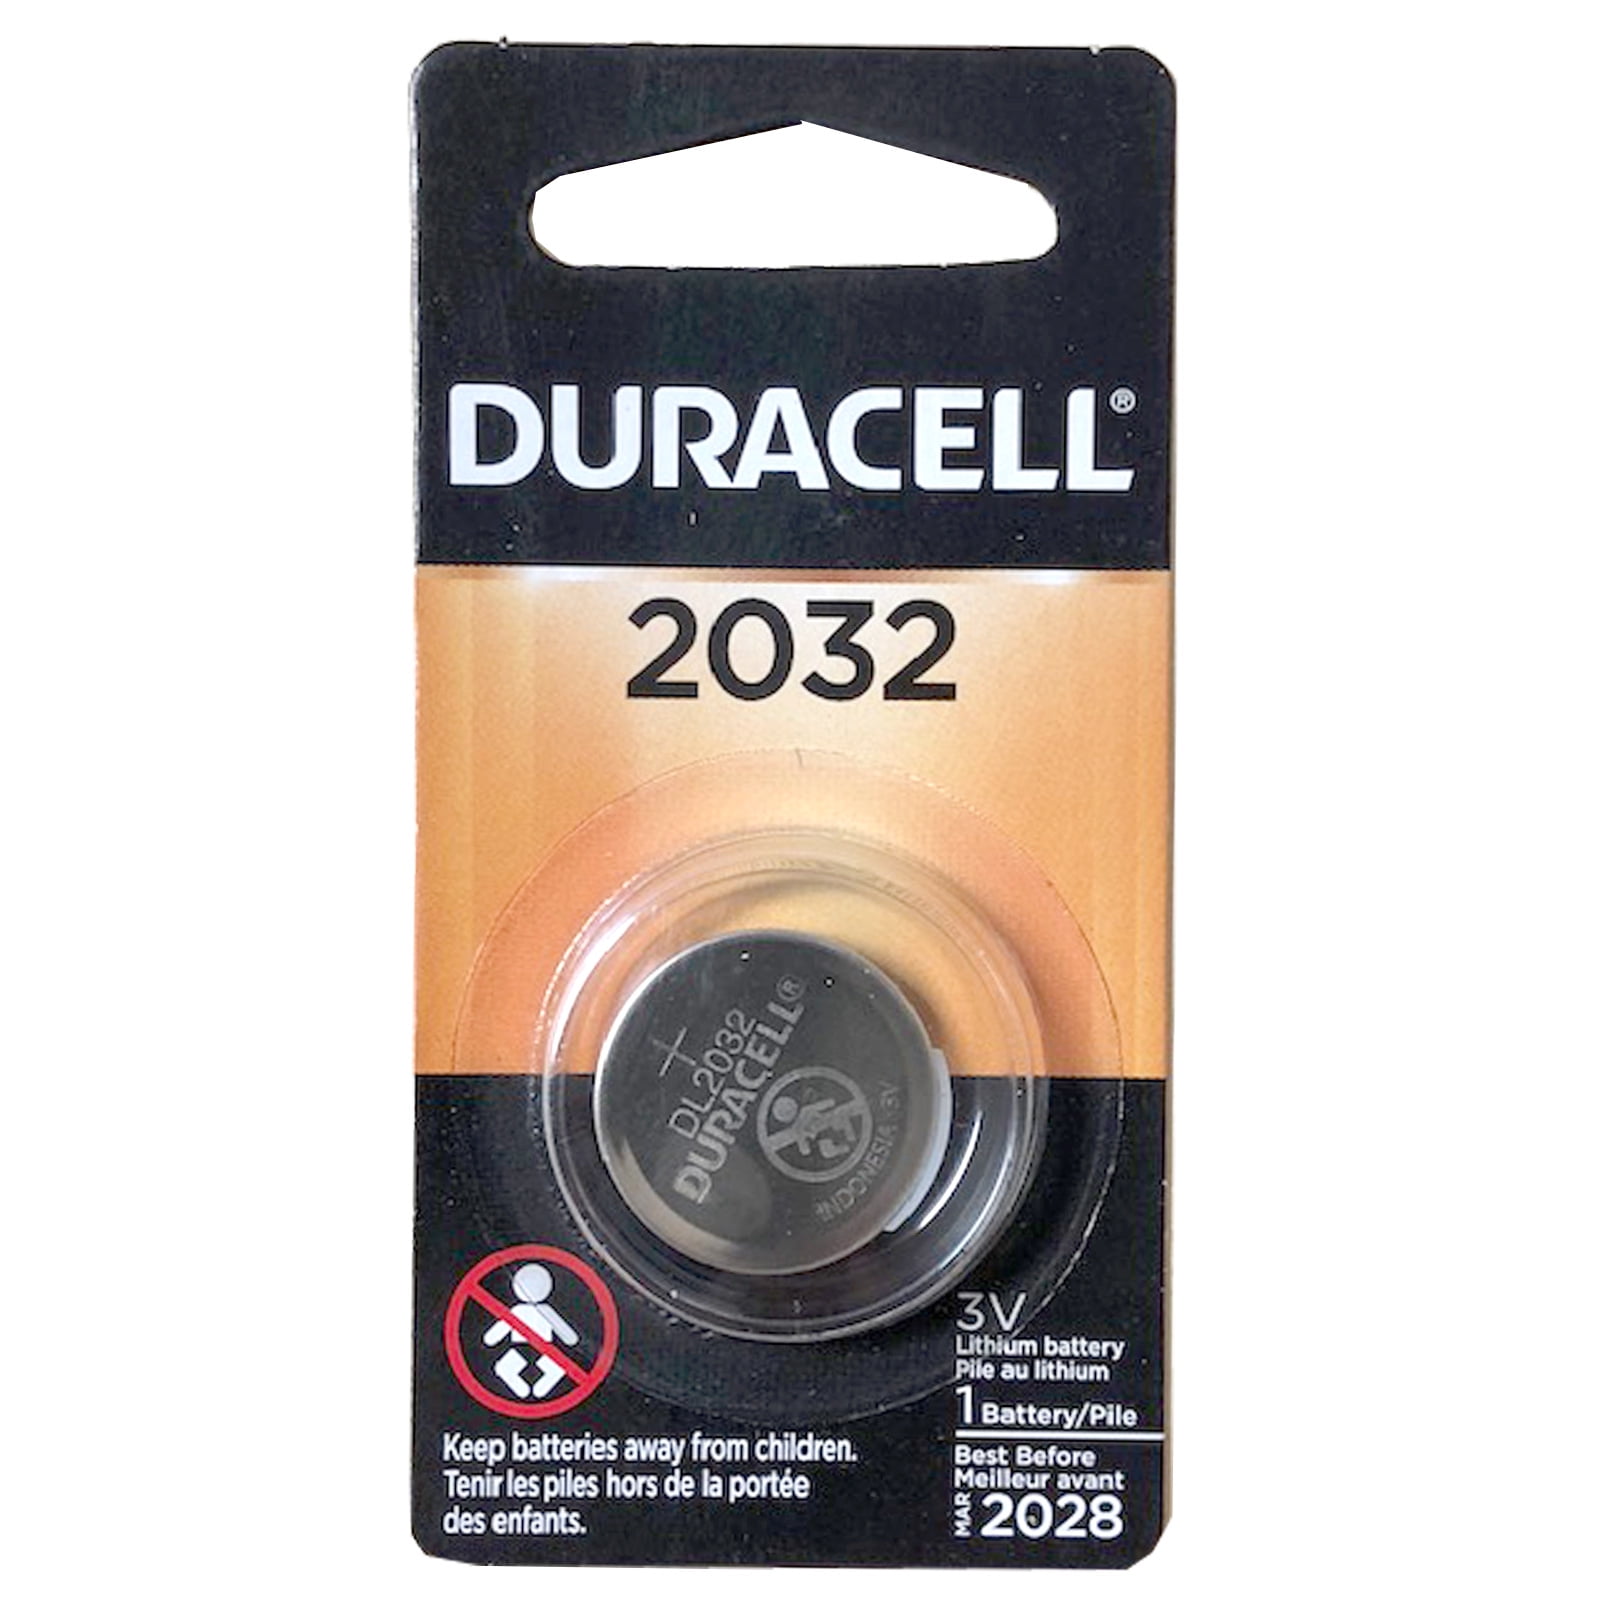 Details about   Duracell CR2032 3v LITHIUM Coin Cell Batteries Pack of 2 DL2032 